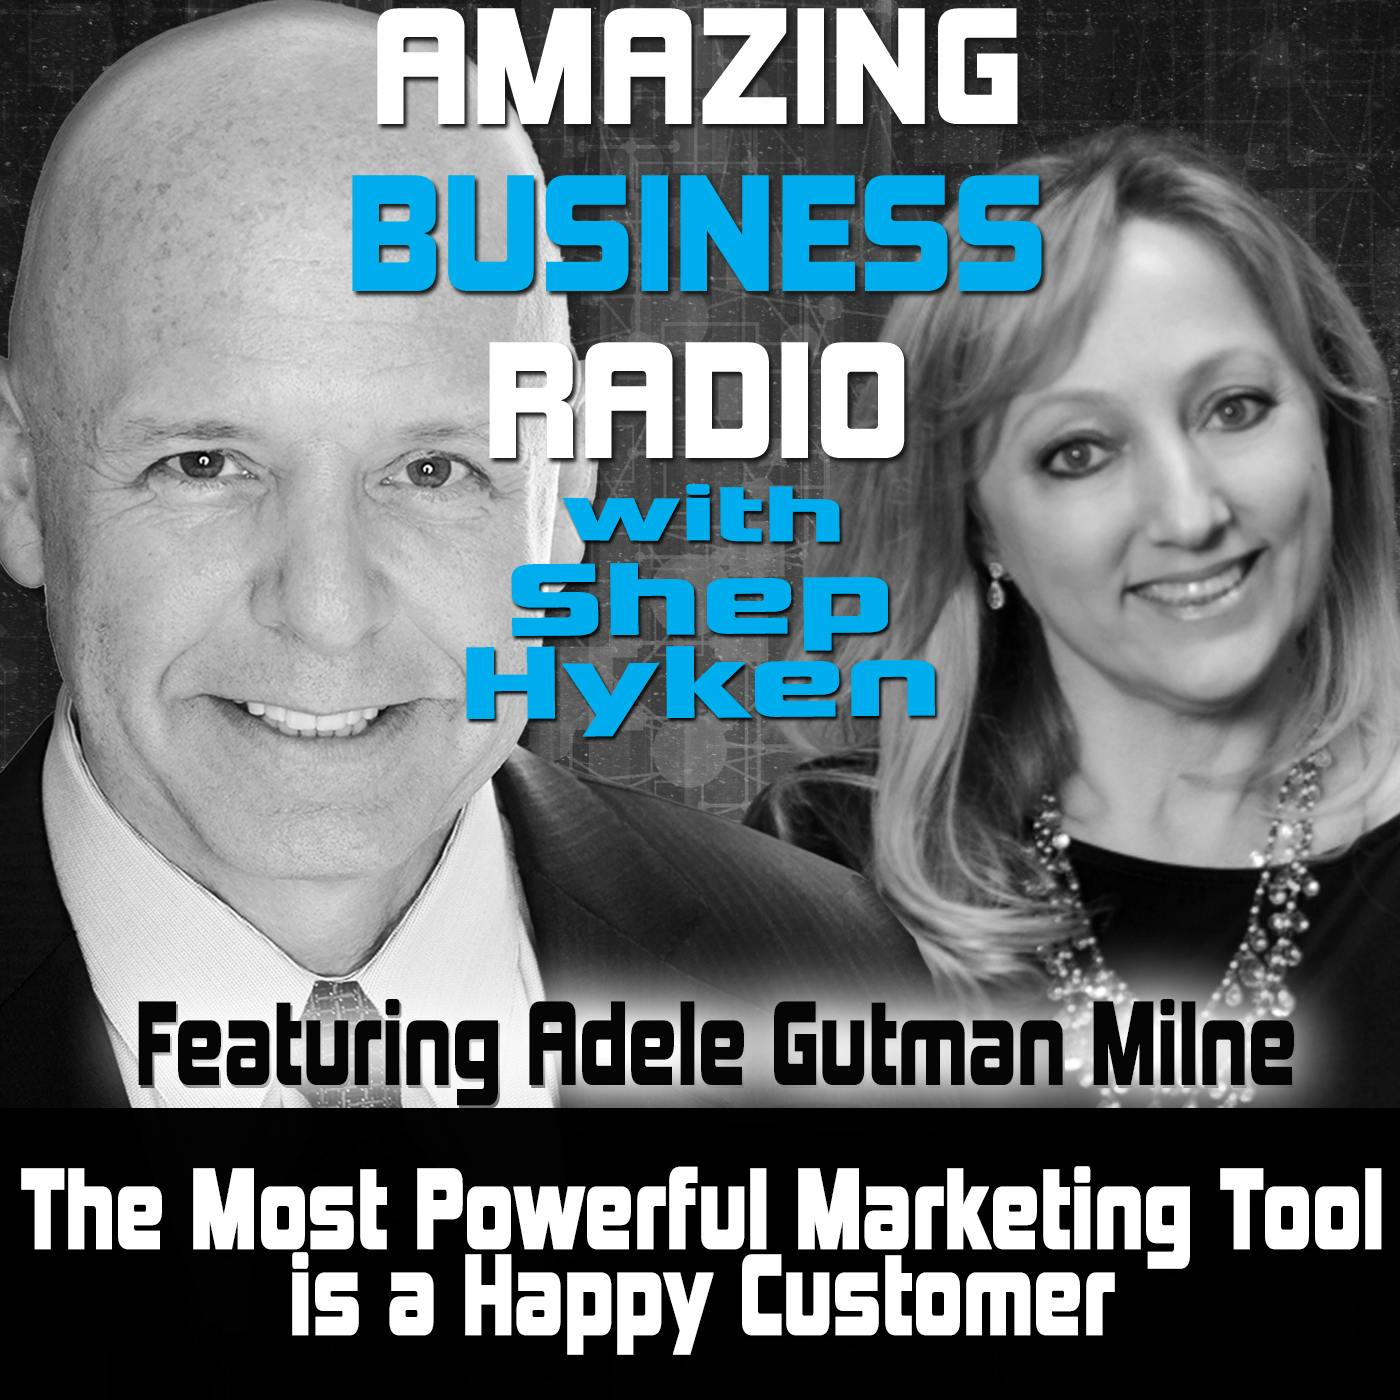 The Most Powerful Marketing Tool is a Happy Customer Featuring Adele Gutman Milne